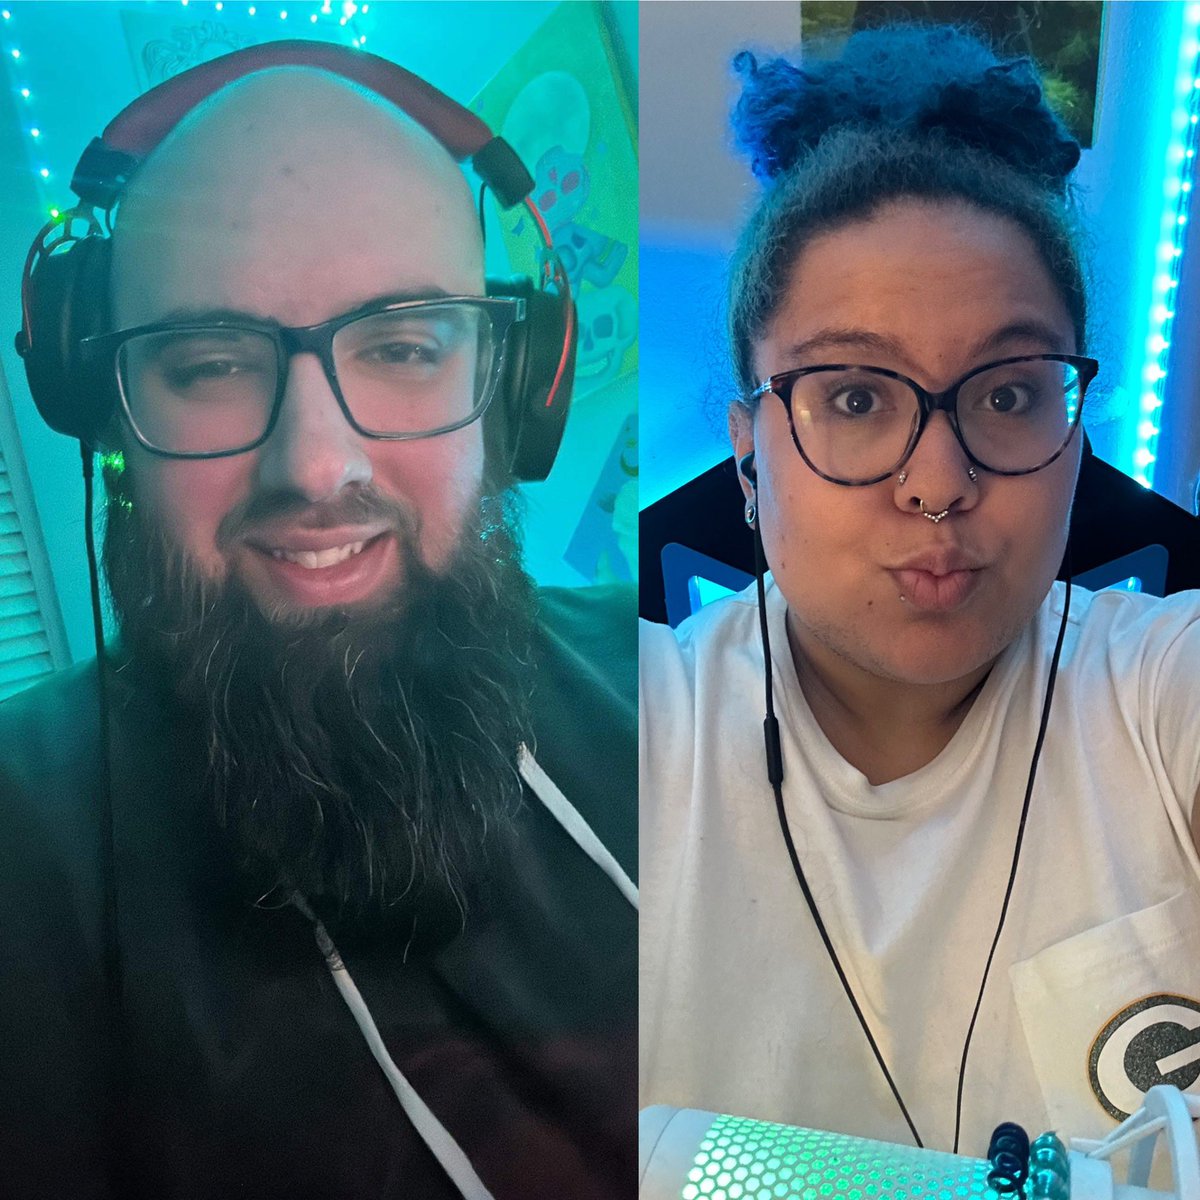 Your fav long distance couple is back at! Day 15! We are playing the newly released @WeWereHereGame game!! Link in the comments!! #twitch #duostream #waketv #stargazerteamtv